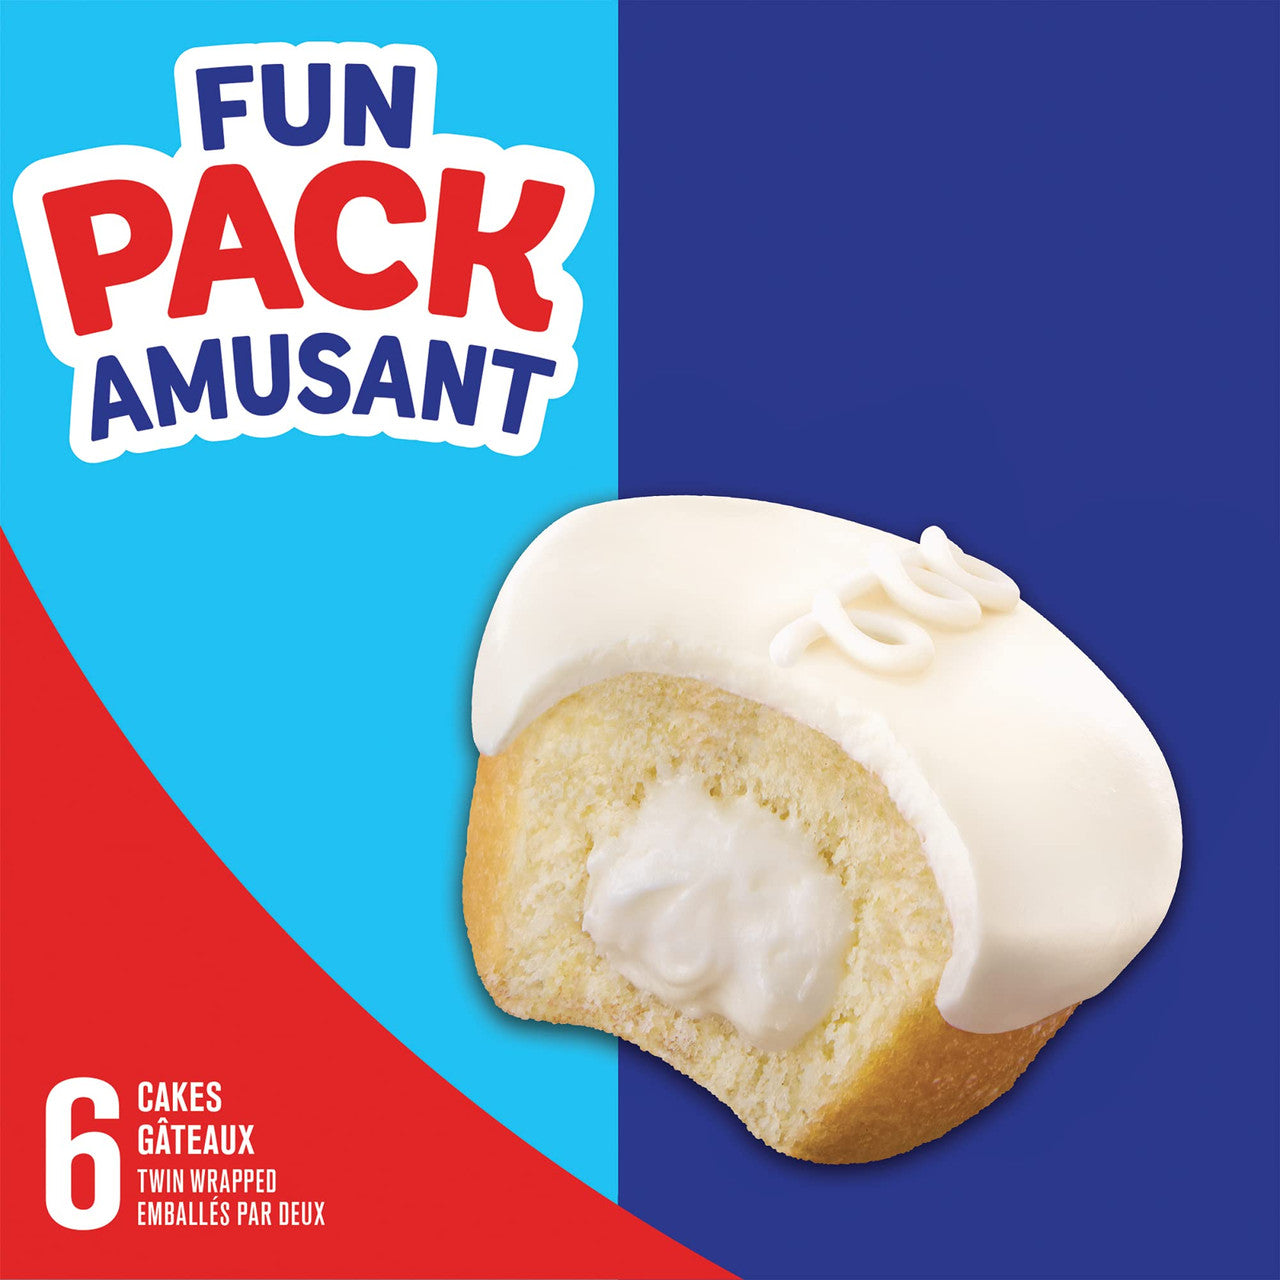 Hostess Vanilla Cupcakes with Frosting and Creamy Filling, Snack Cakes, Contains 6 Cupcakes (Twin Wrapped), 206g/7.3 oz, Box, {Imported from Canada}